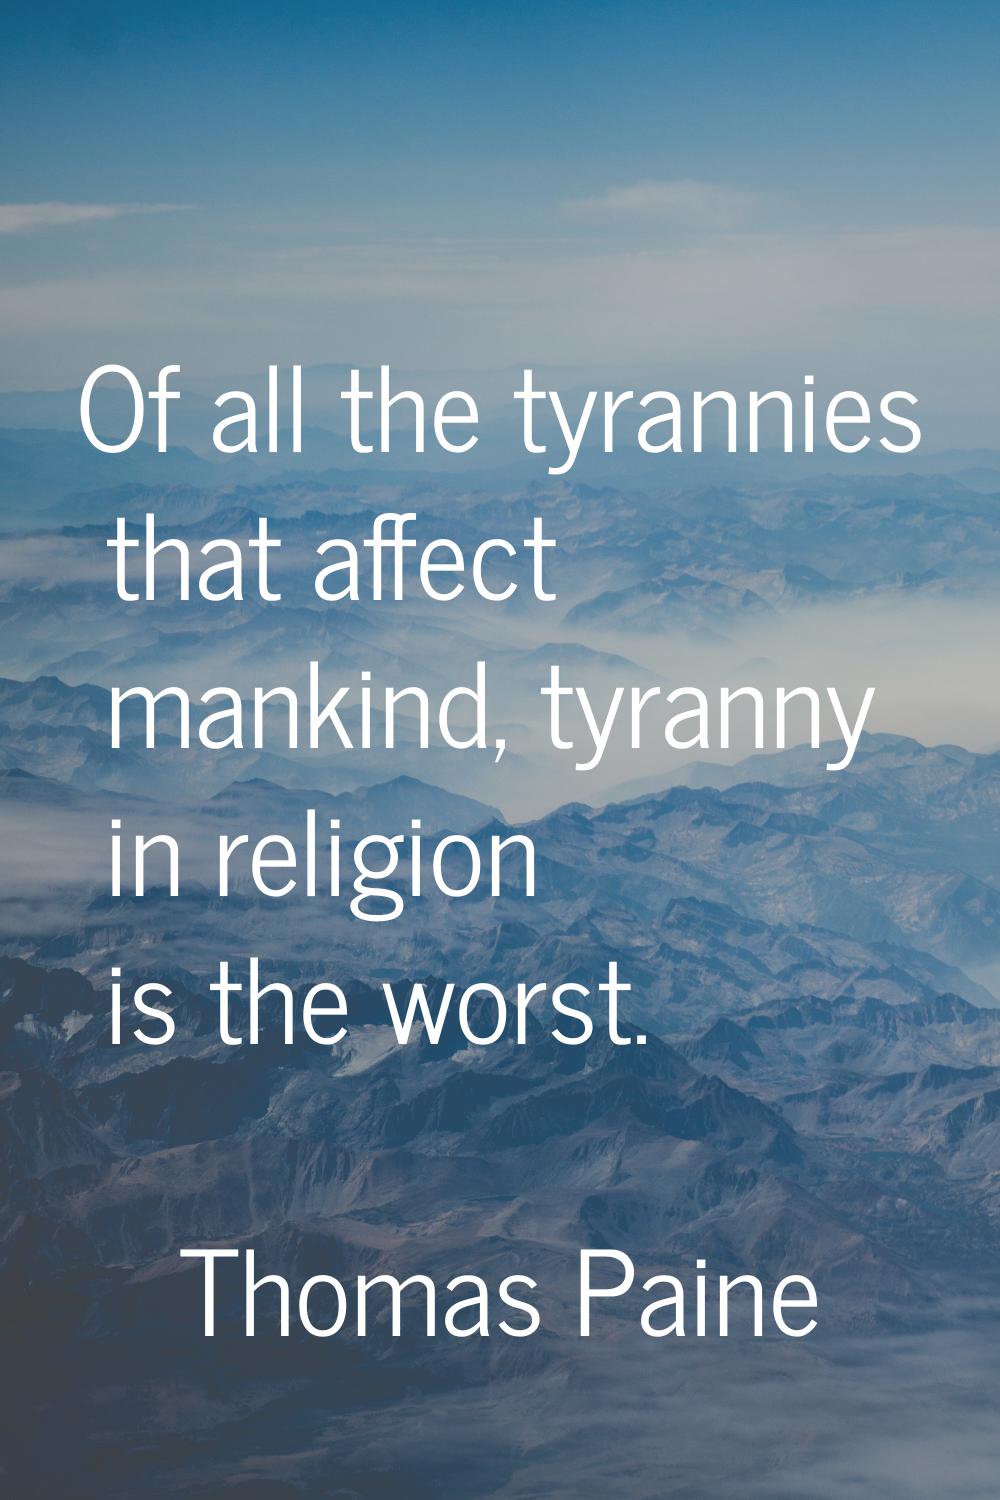 Of all the tyrannies that affect mankind, tyranny in religion is the worst.